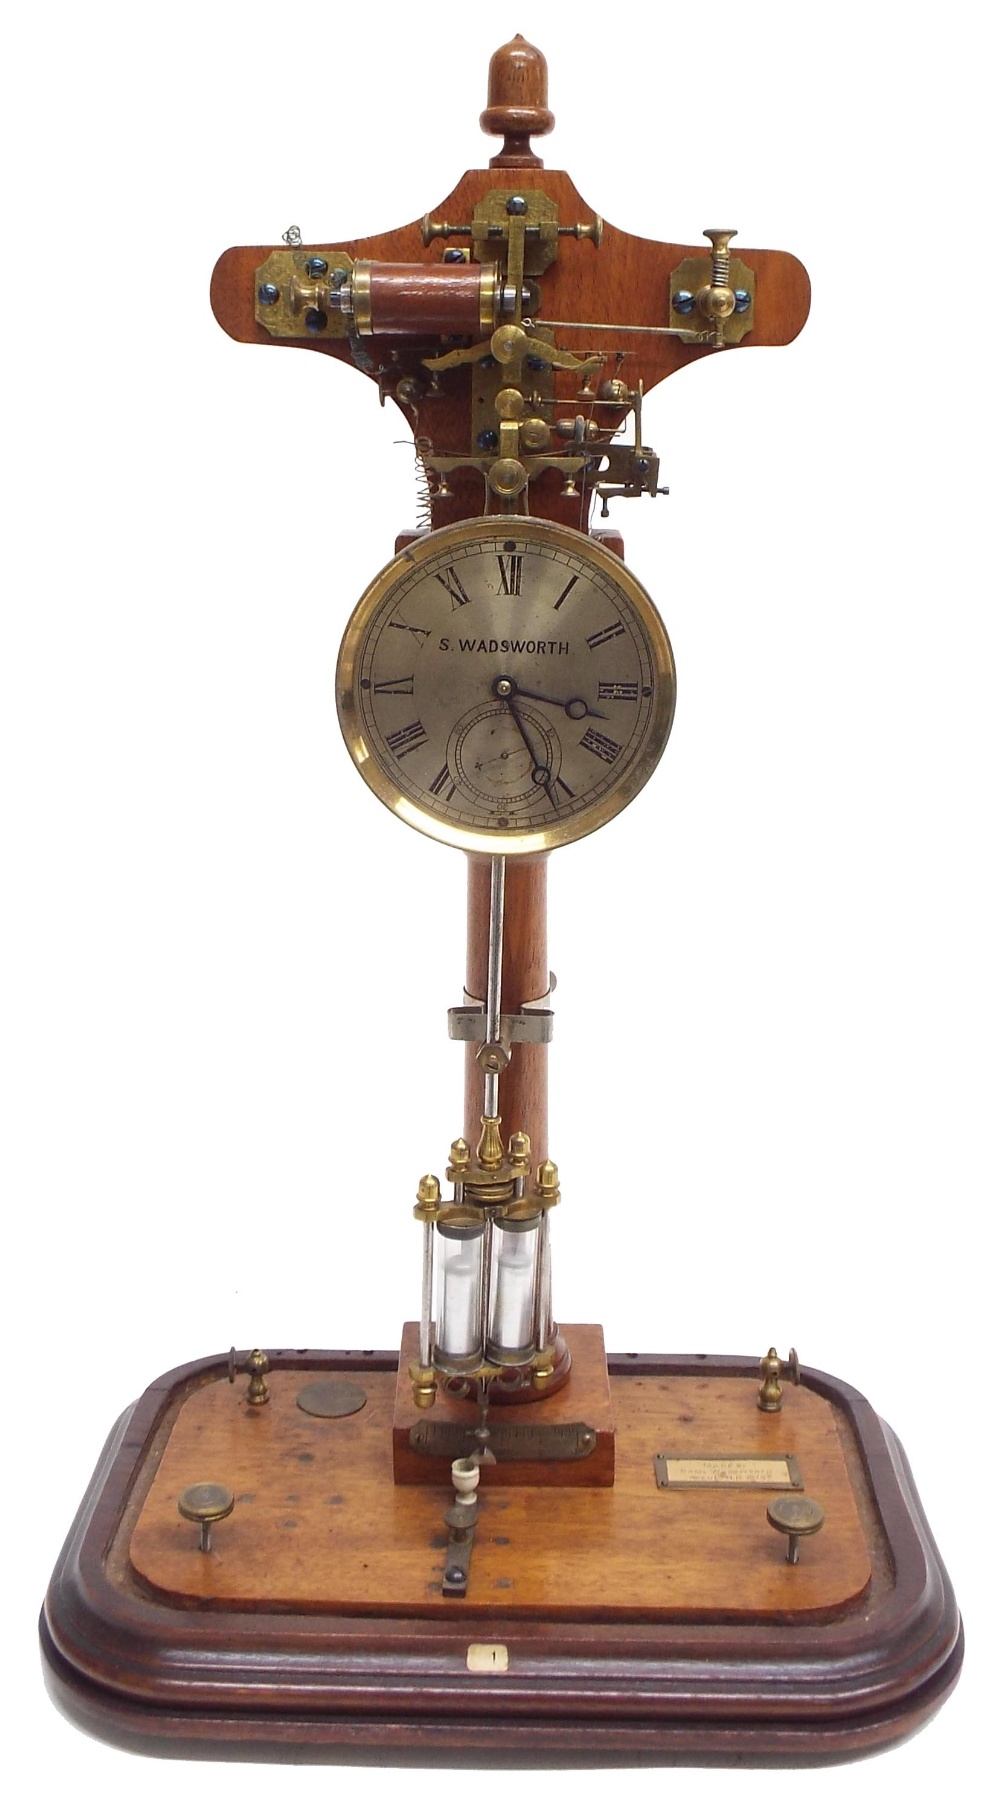 Fine and unique electric mantel clock made by Samuel Wadsworth of New Hampshire, USA in 1875, the